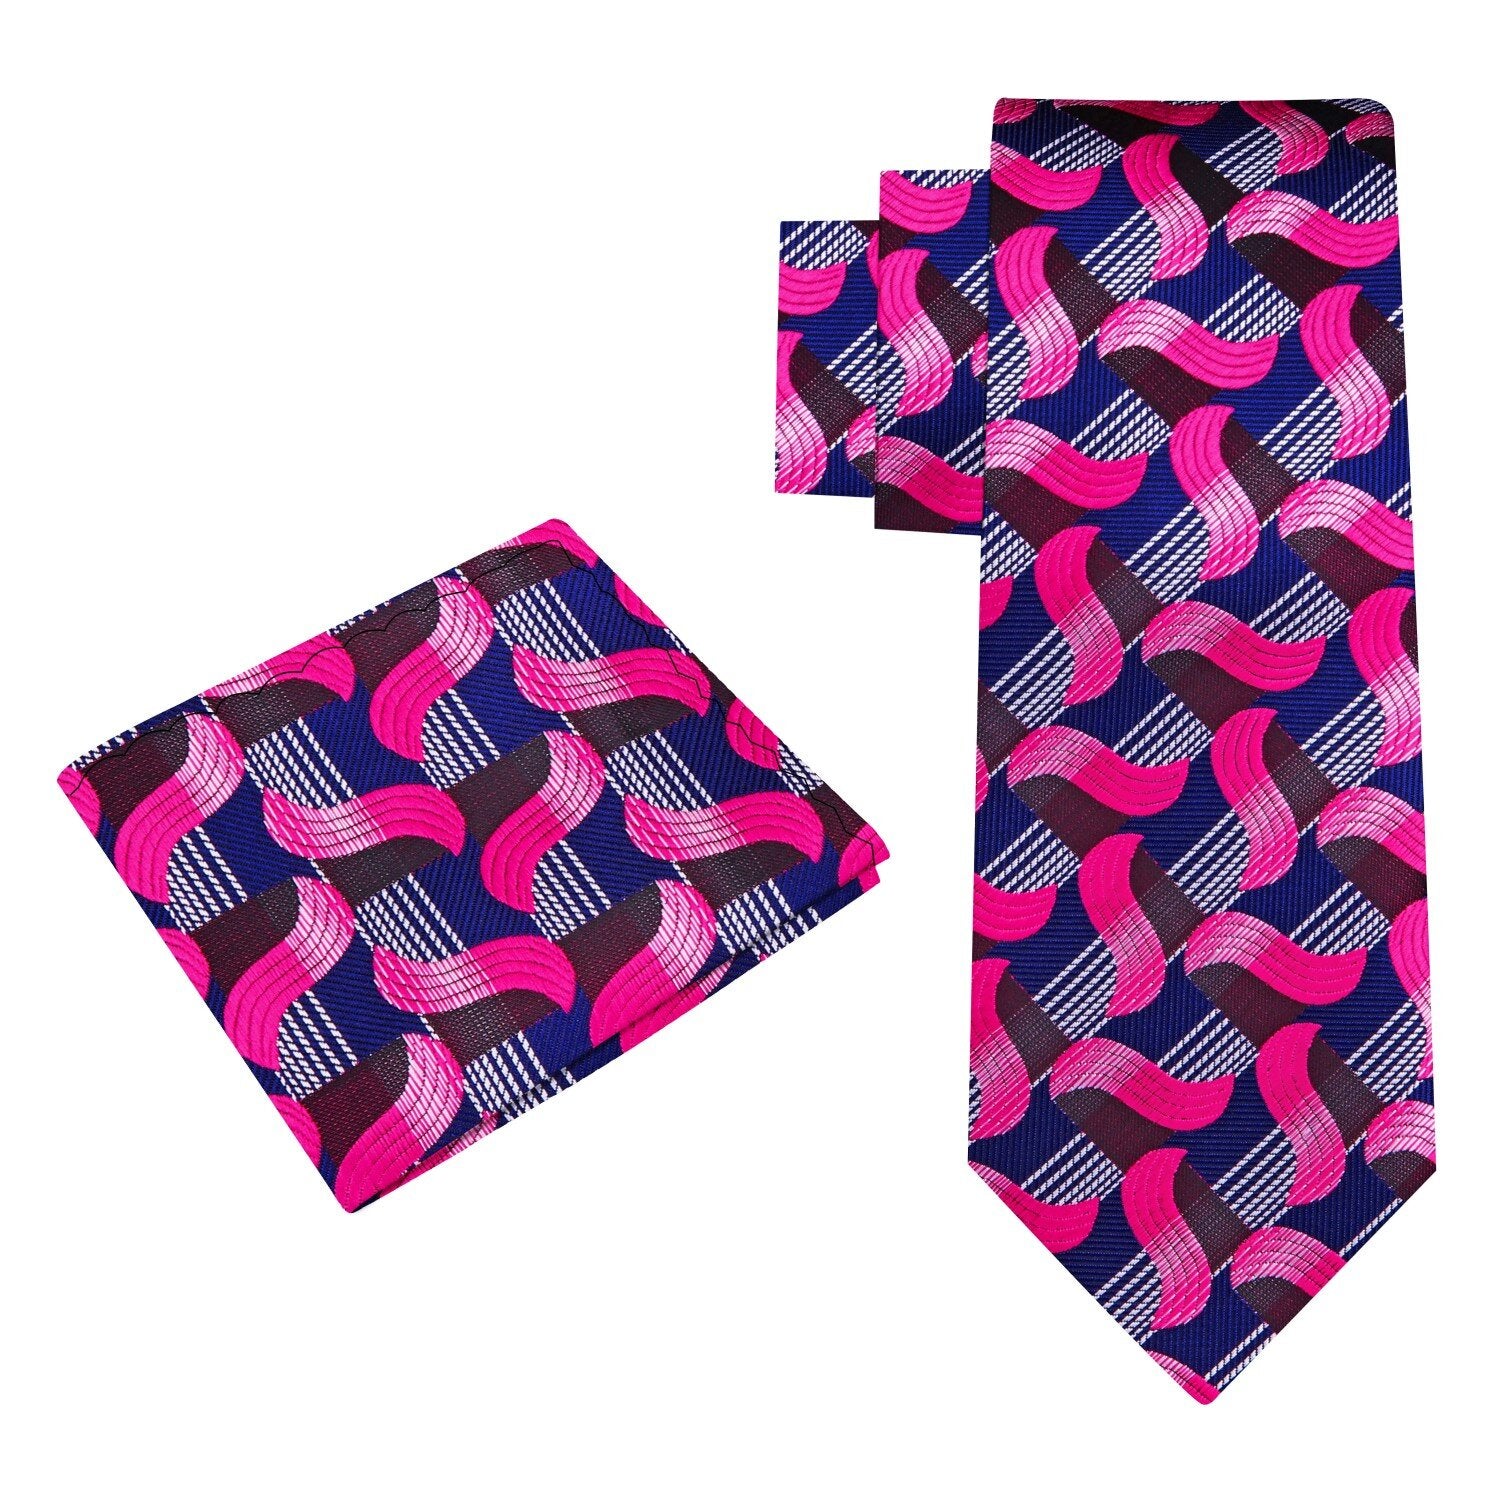 Alt View: A Blue, Dark Blue, Pink Abstract Wavy Lines Pattern Silk Necktie, With Matching Pocket Square